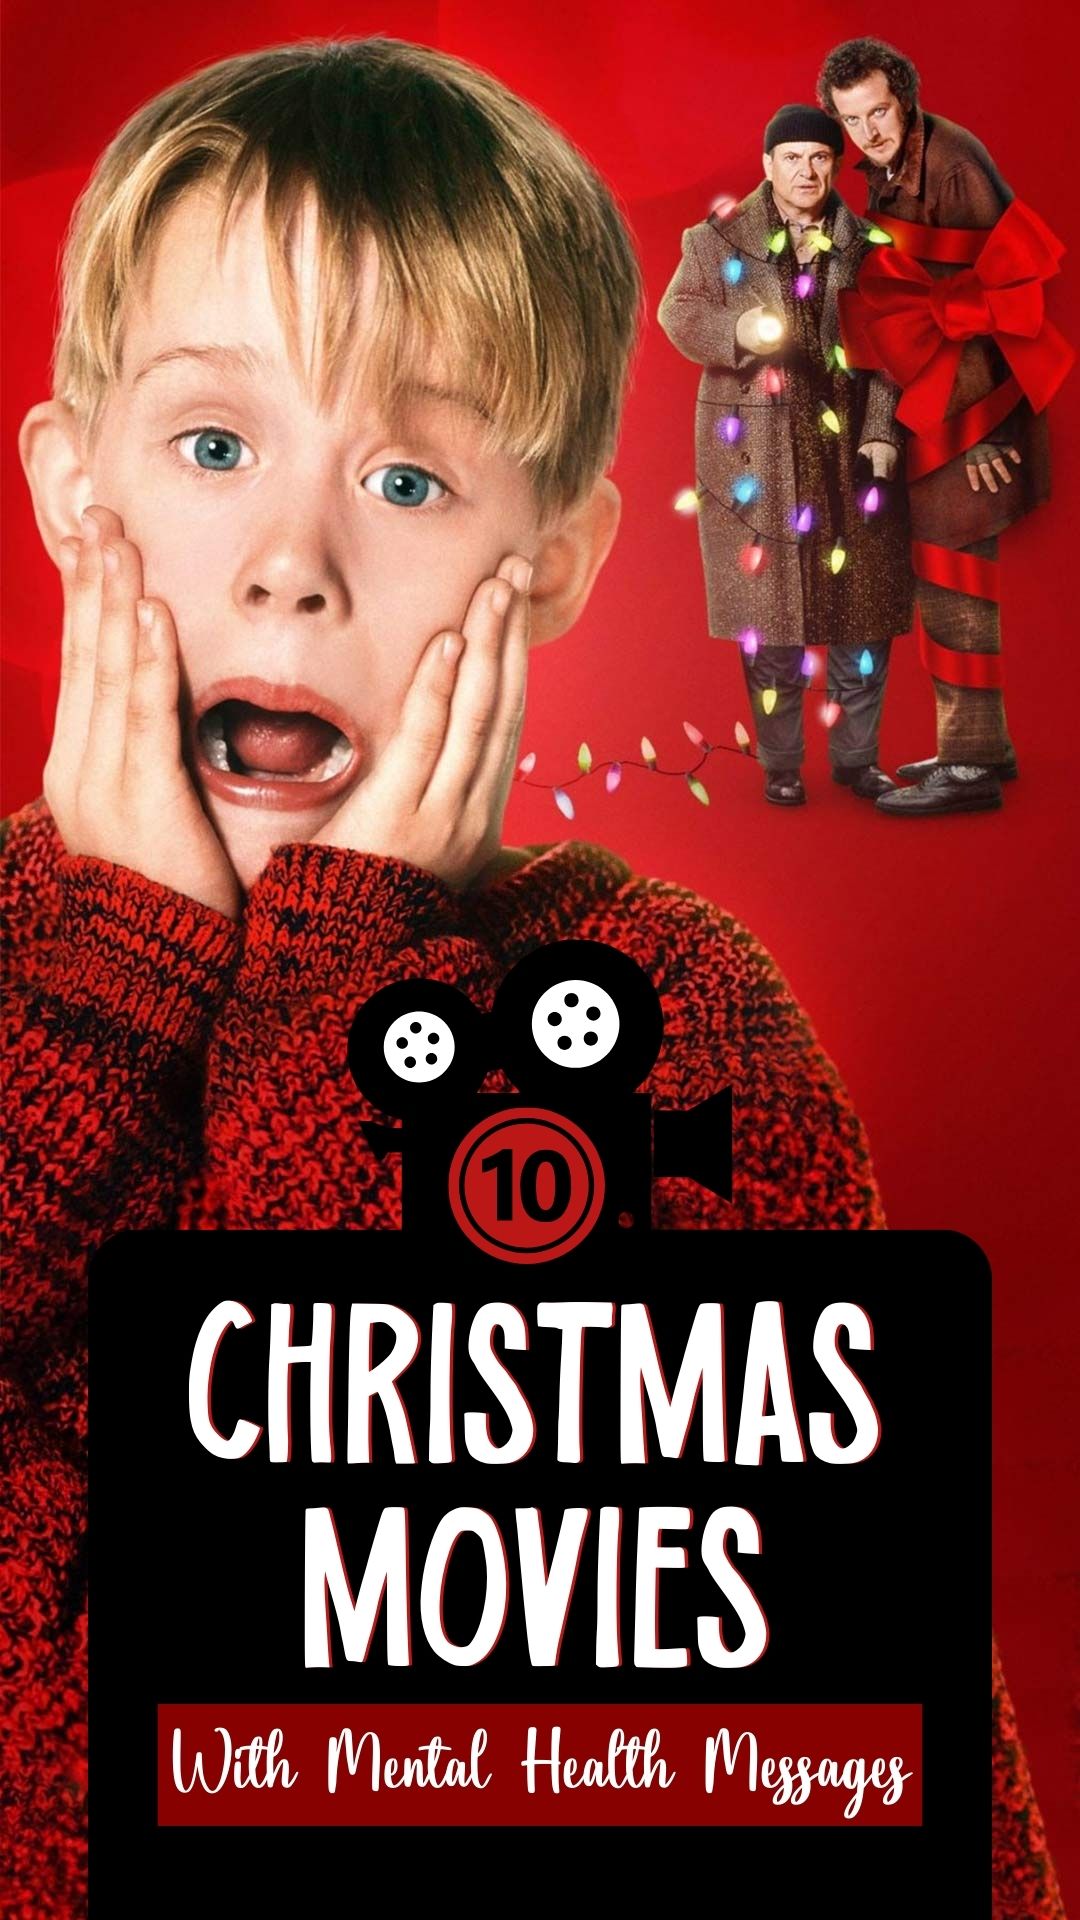 10 Christmas Movies With Mental Health Messages